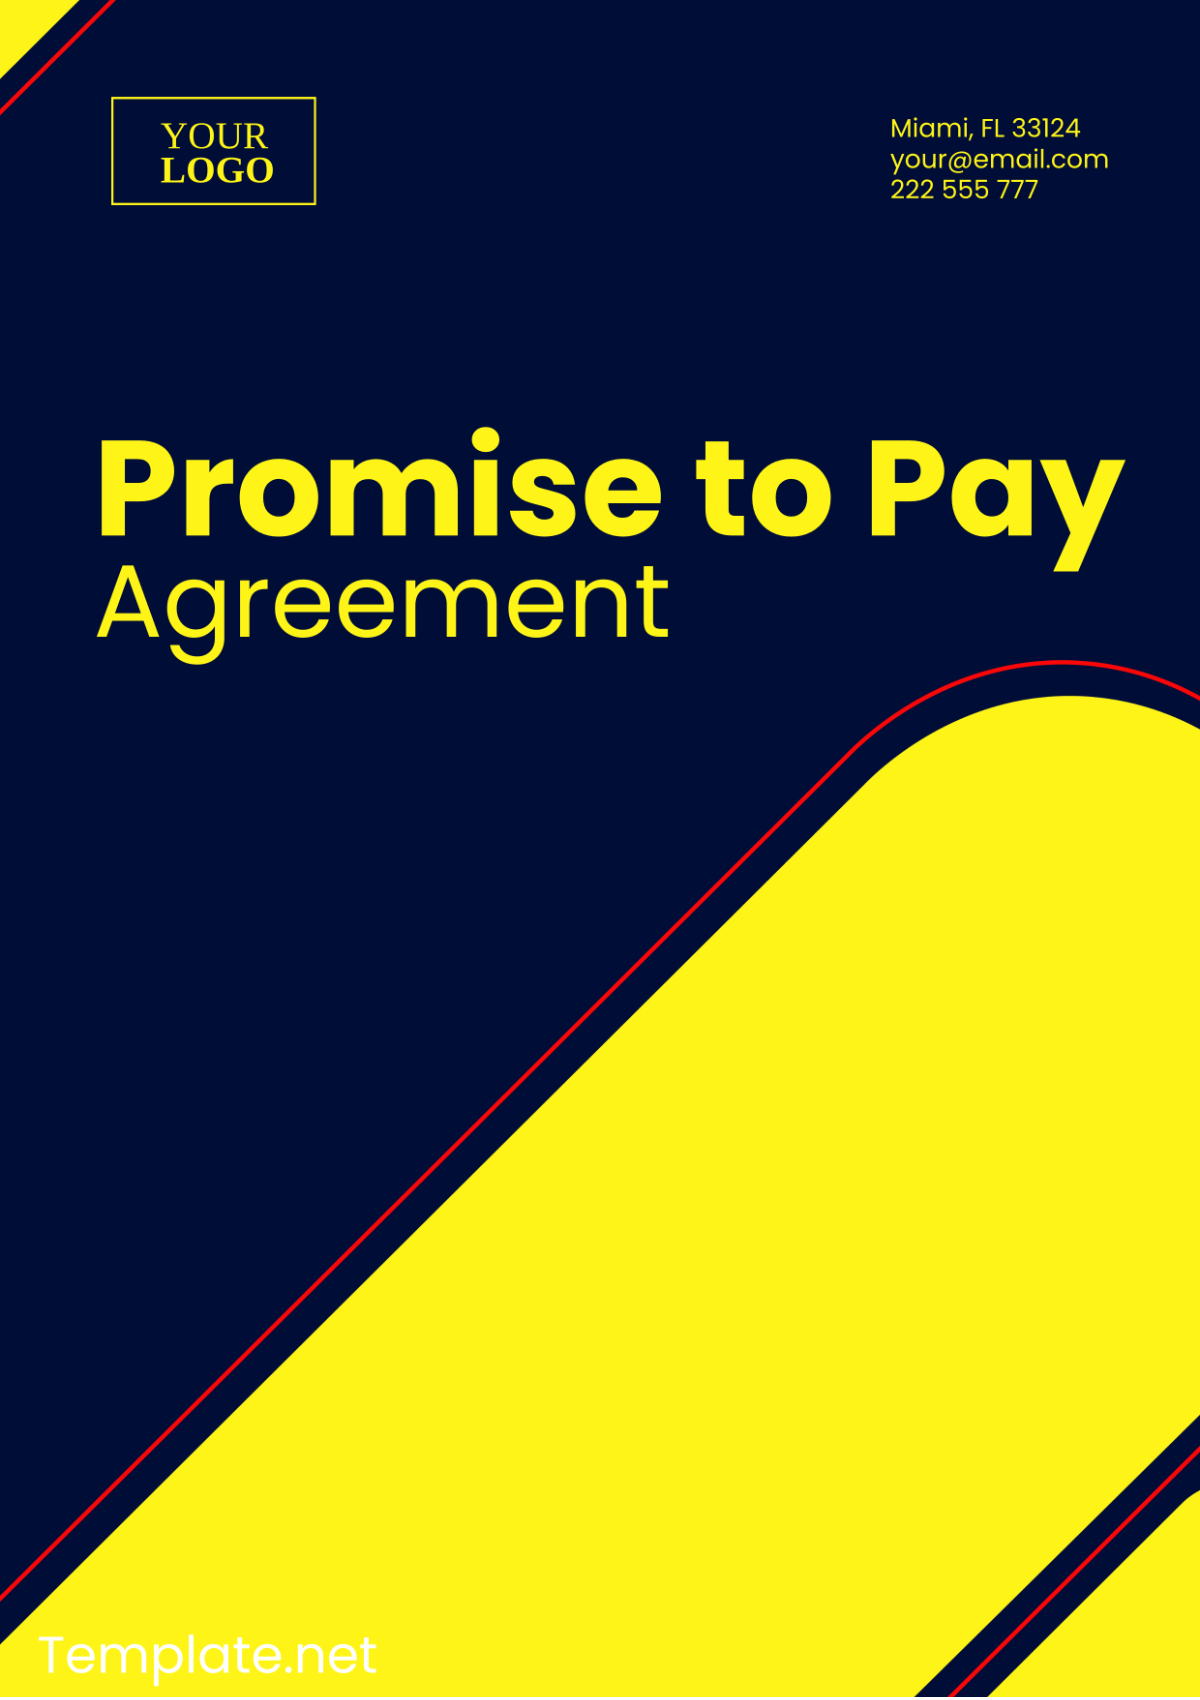 Promise to Pay Agreement Template